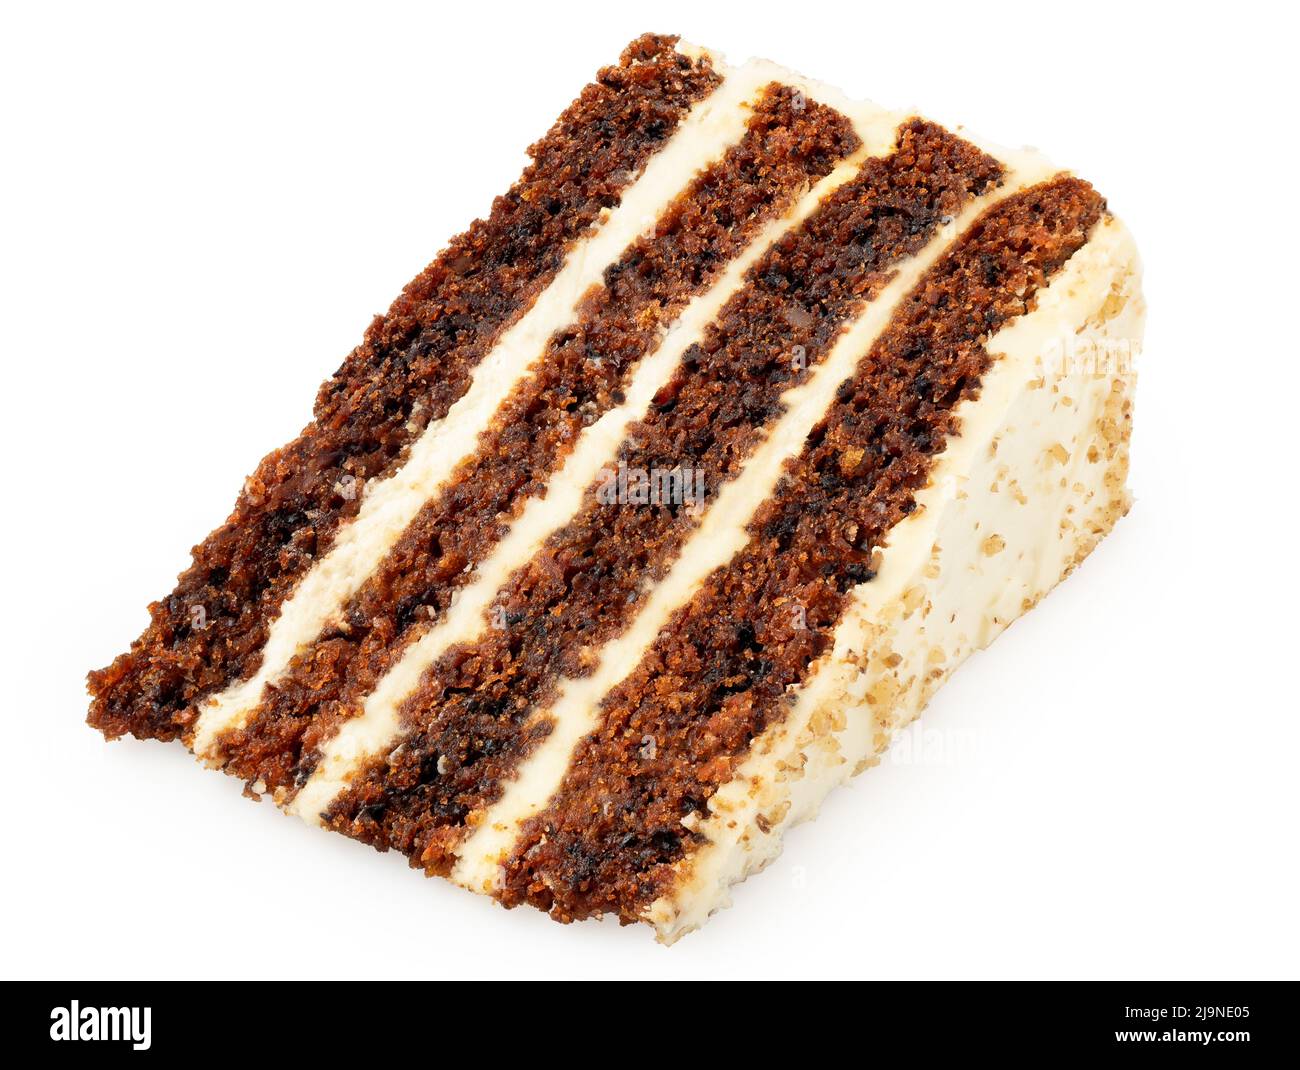 Slice of carrot cake with cream cheese filling and frosting isolated on white. Lying down. Stock Photo